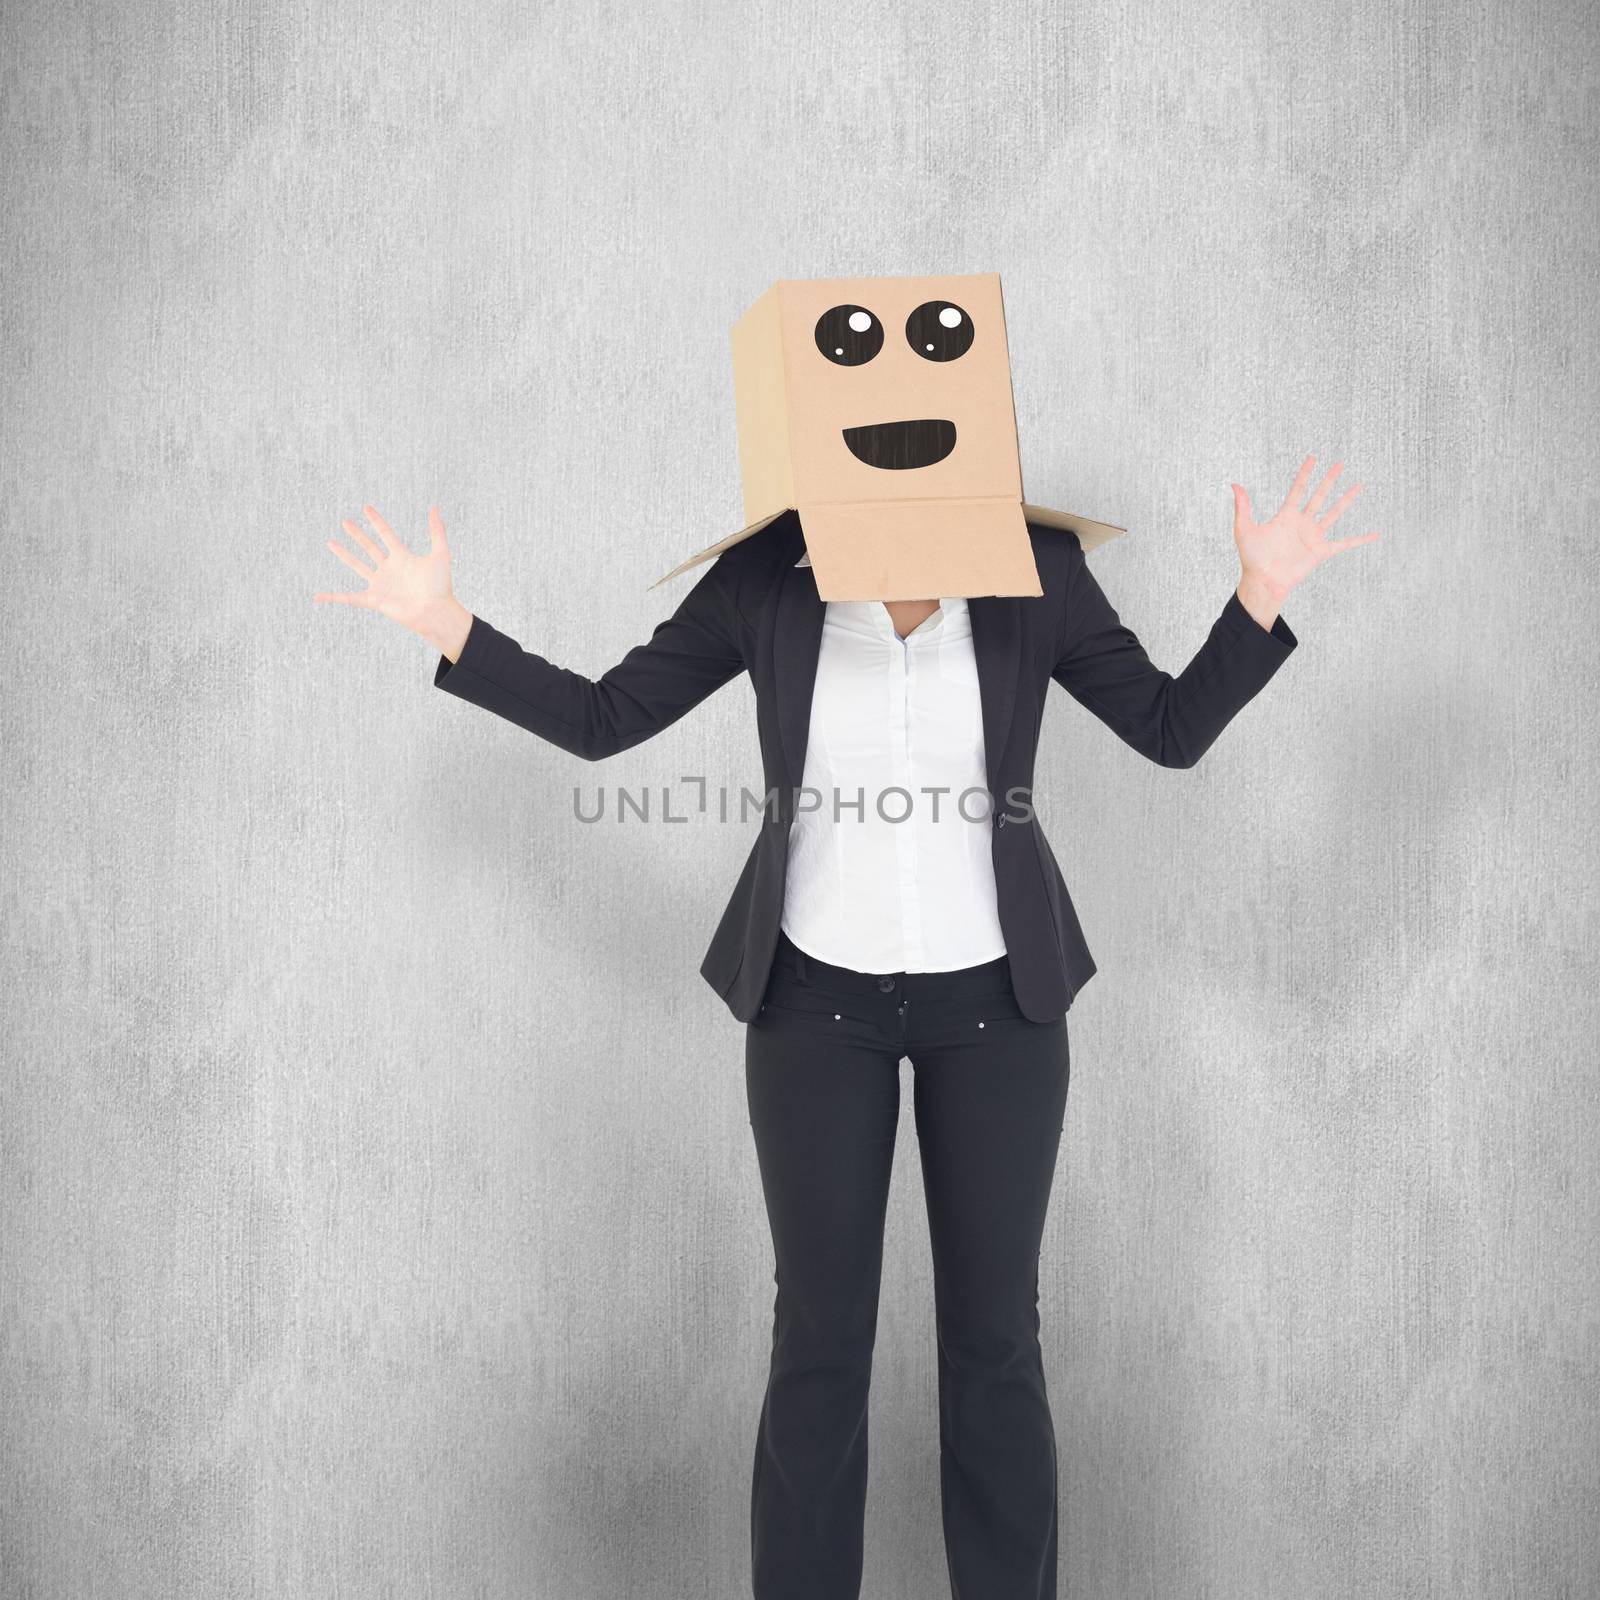 Businesswoman with box over head against white background